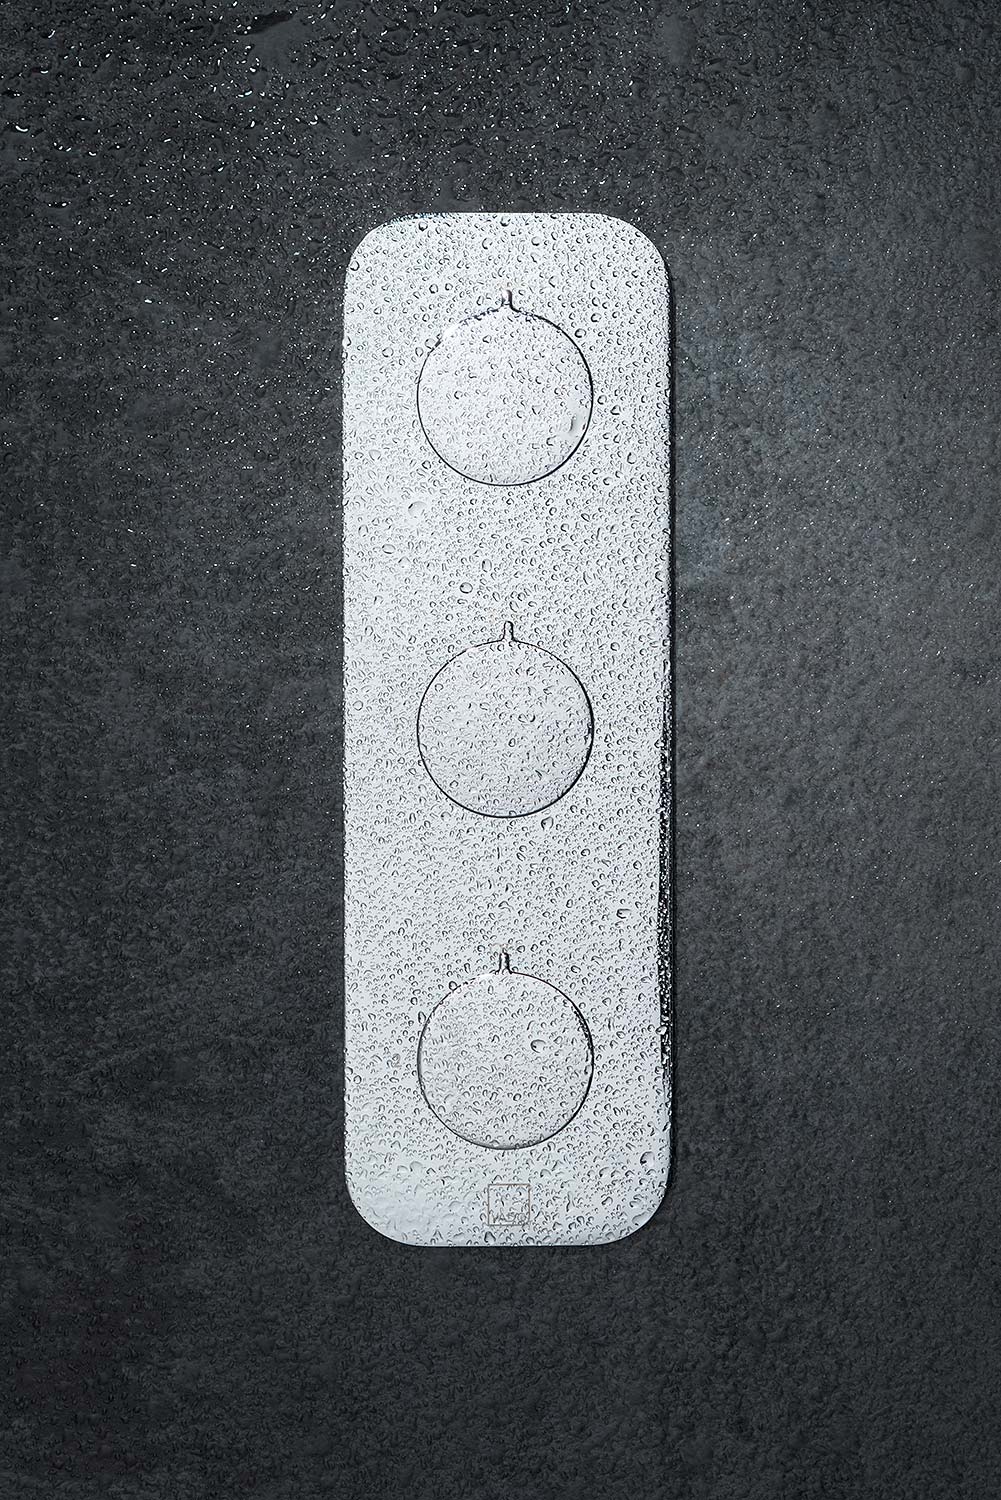 Square on photograph of a three handle shower valve covered in water drops on a dark grey wall